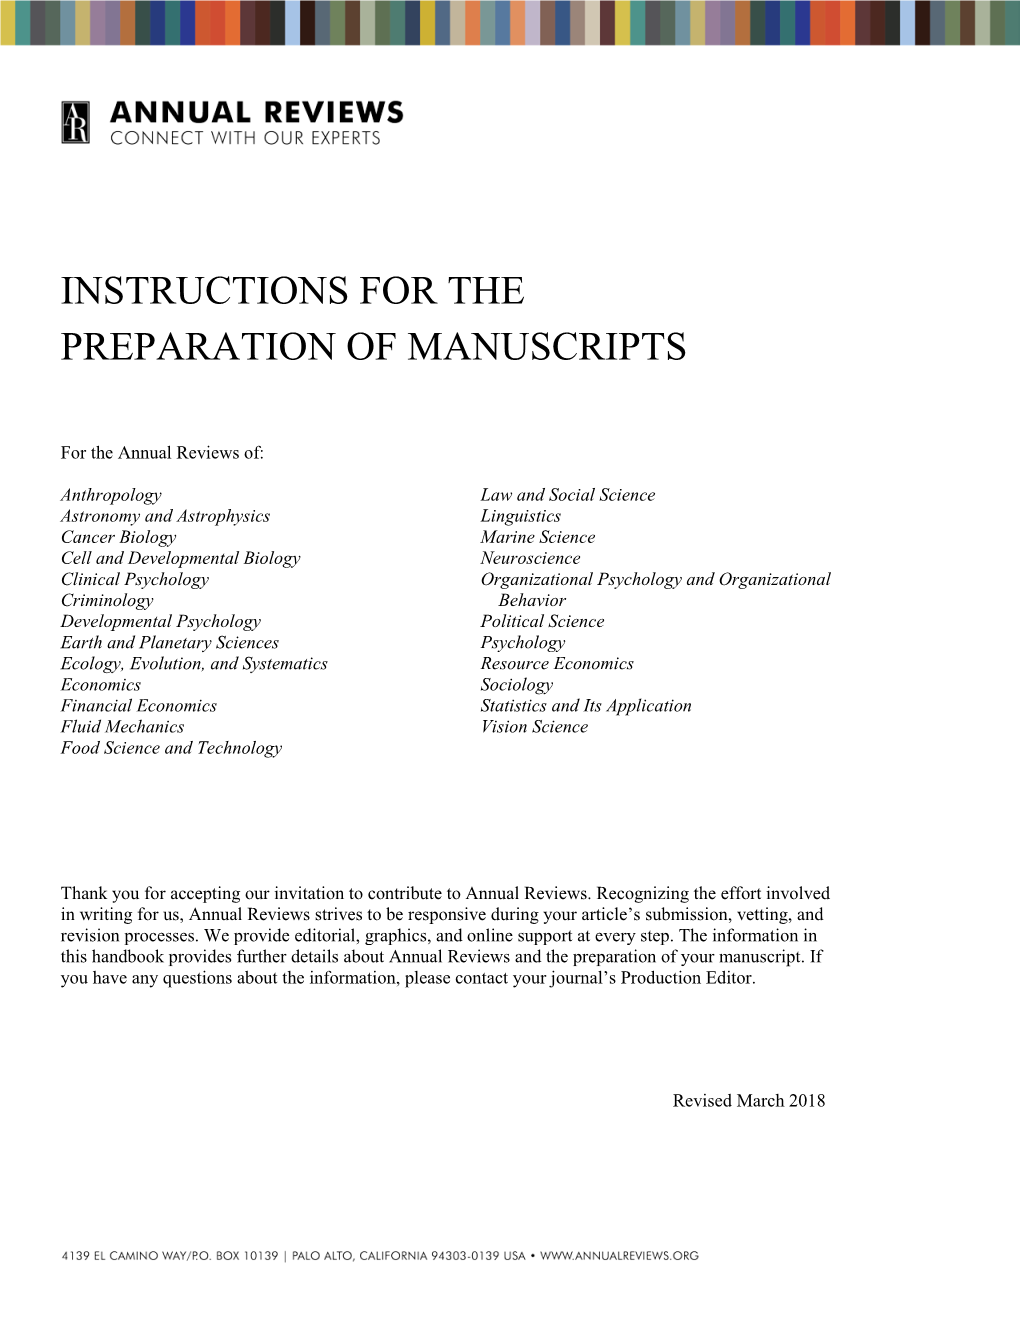 Instructions for the Preparation of Manuscripts